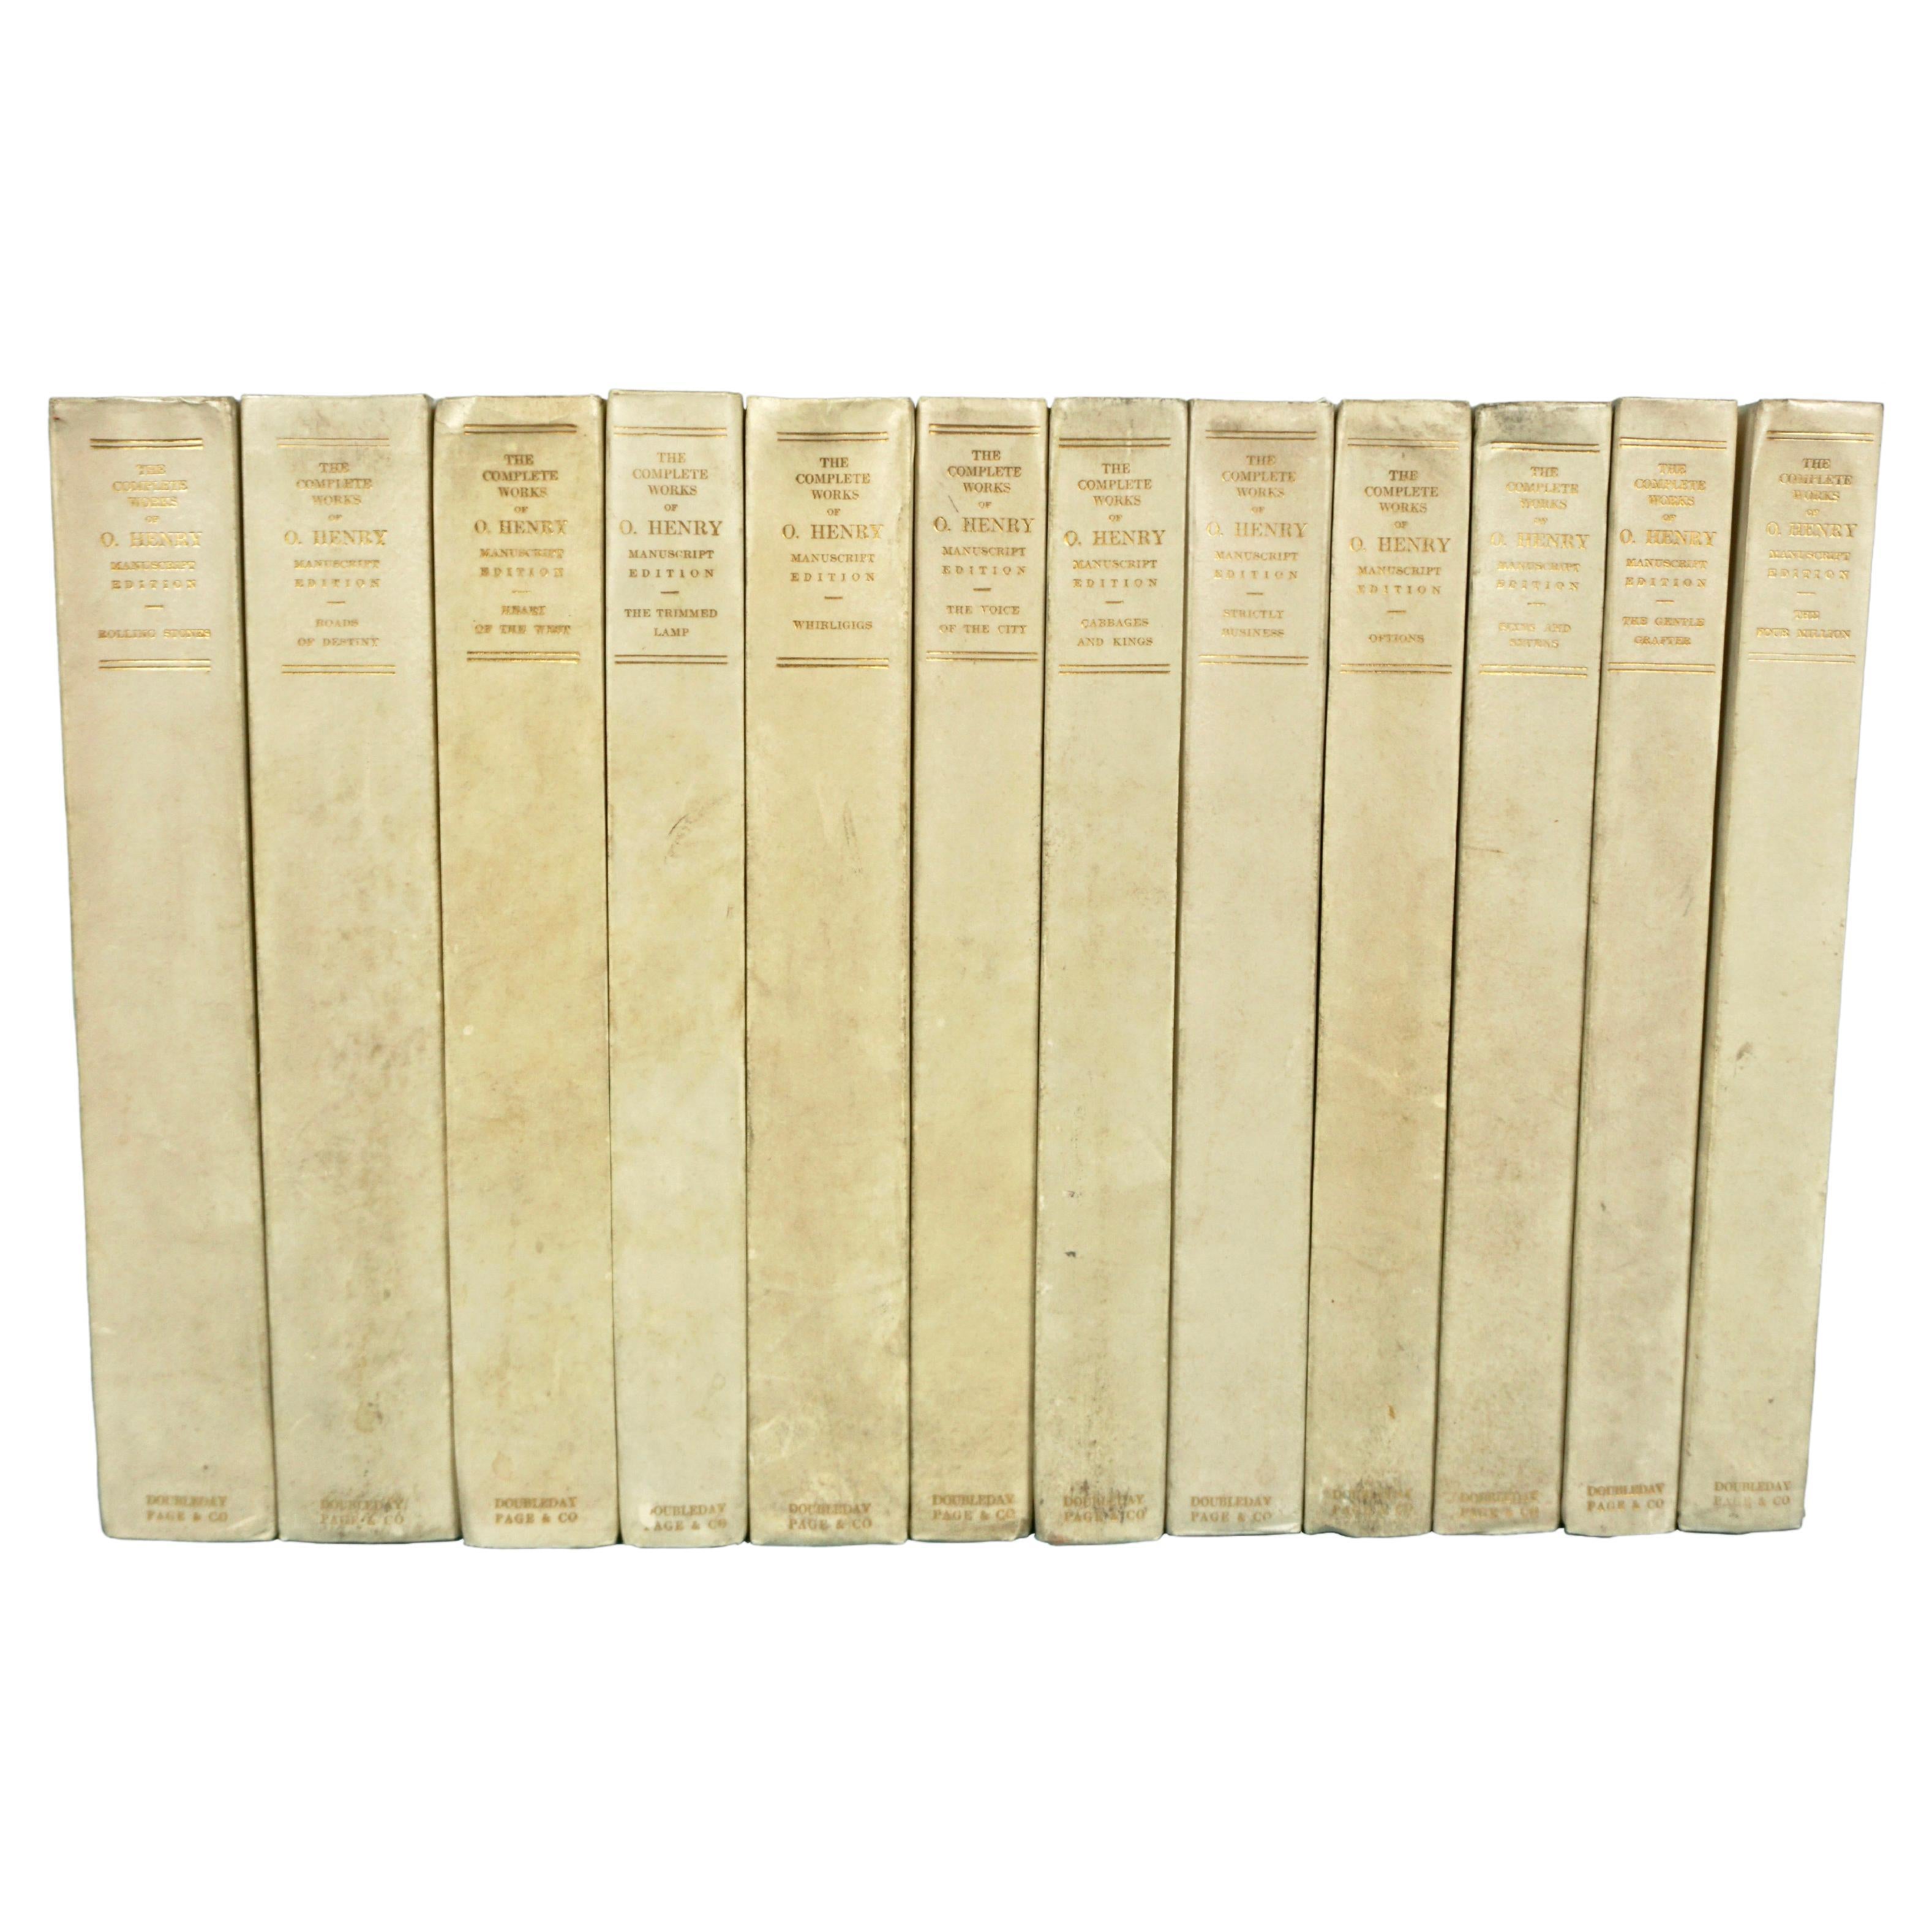 The Complete Works of O. Henry, Manuscript Edition Limited to 125 Copies